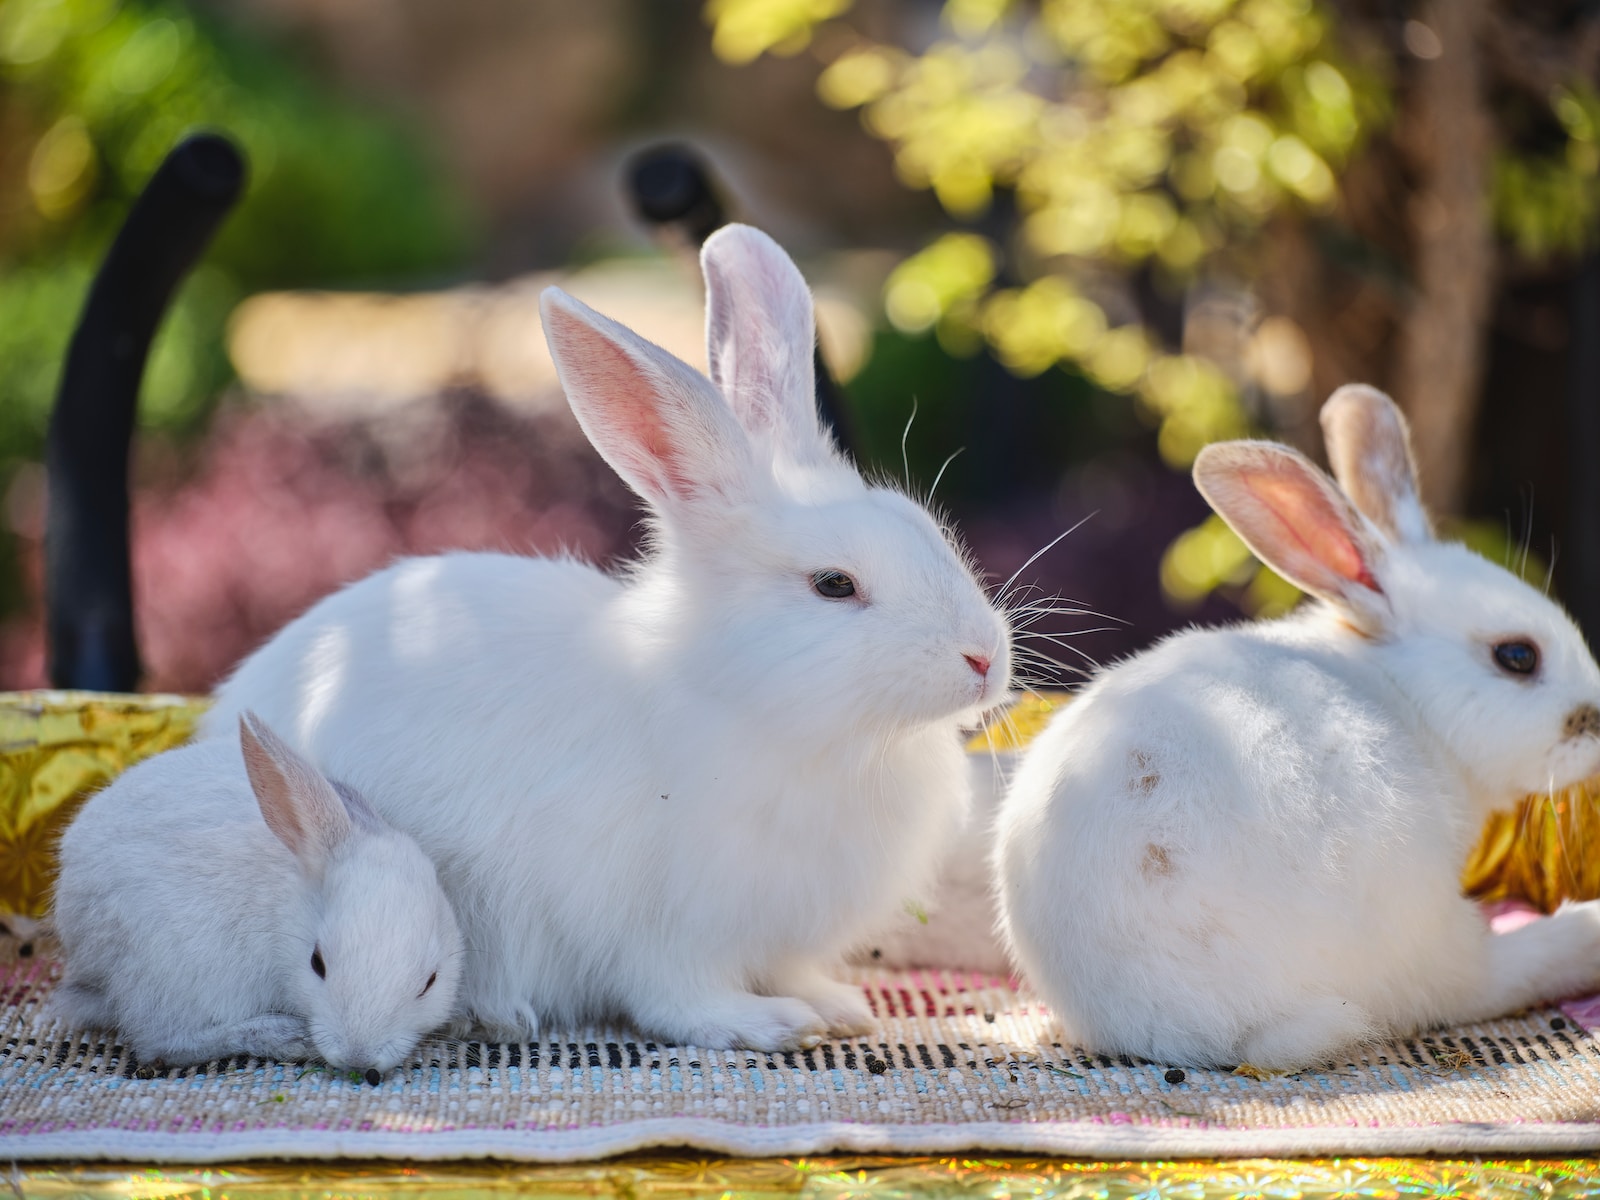 two white rabbits sitting next to each other on a table